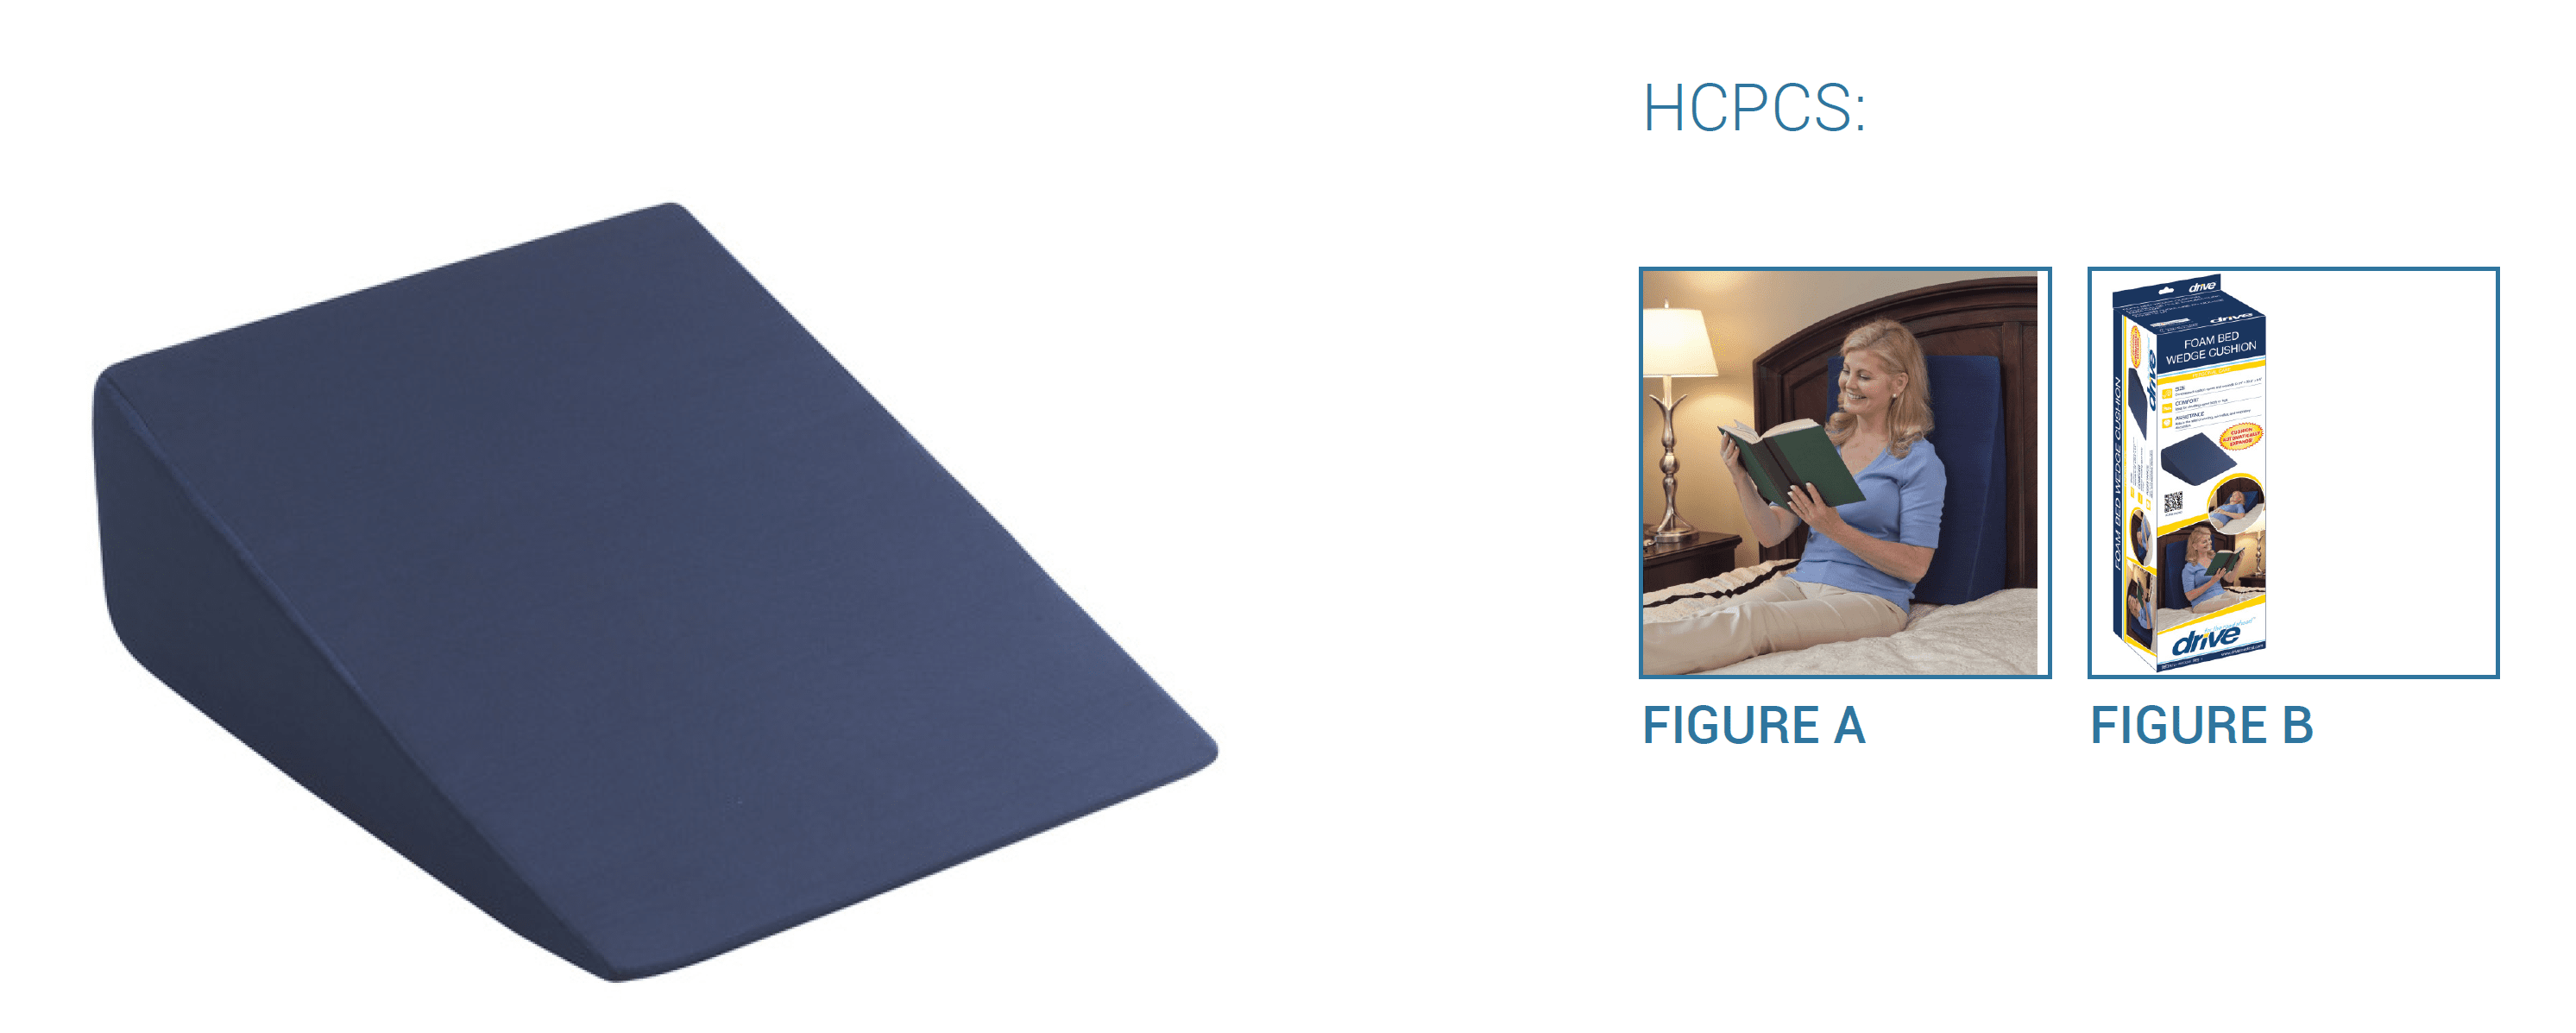 Compressed Bed Wedge Cushion: Help Inc. - Everyone is relying on you. You can rely on us.